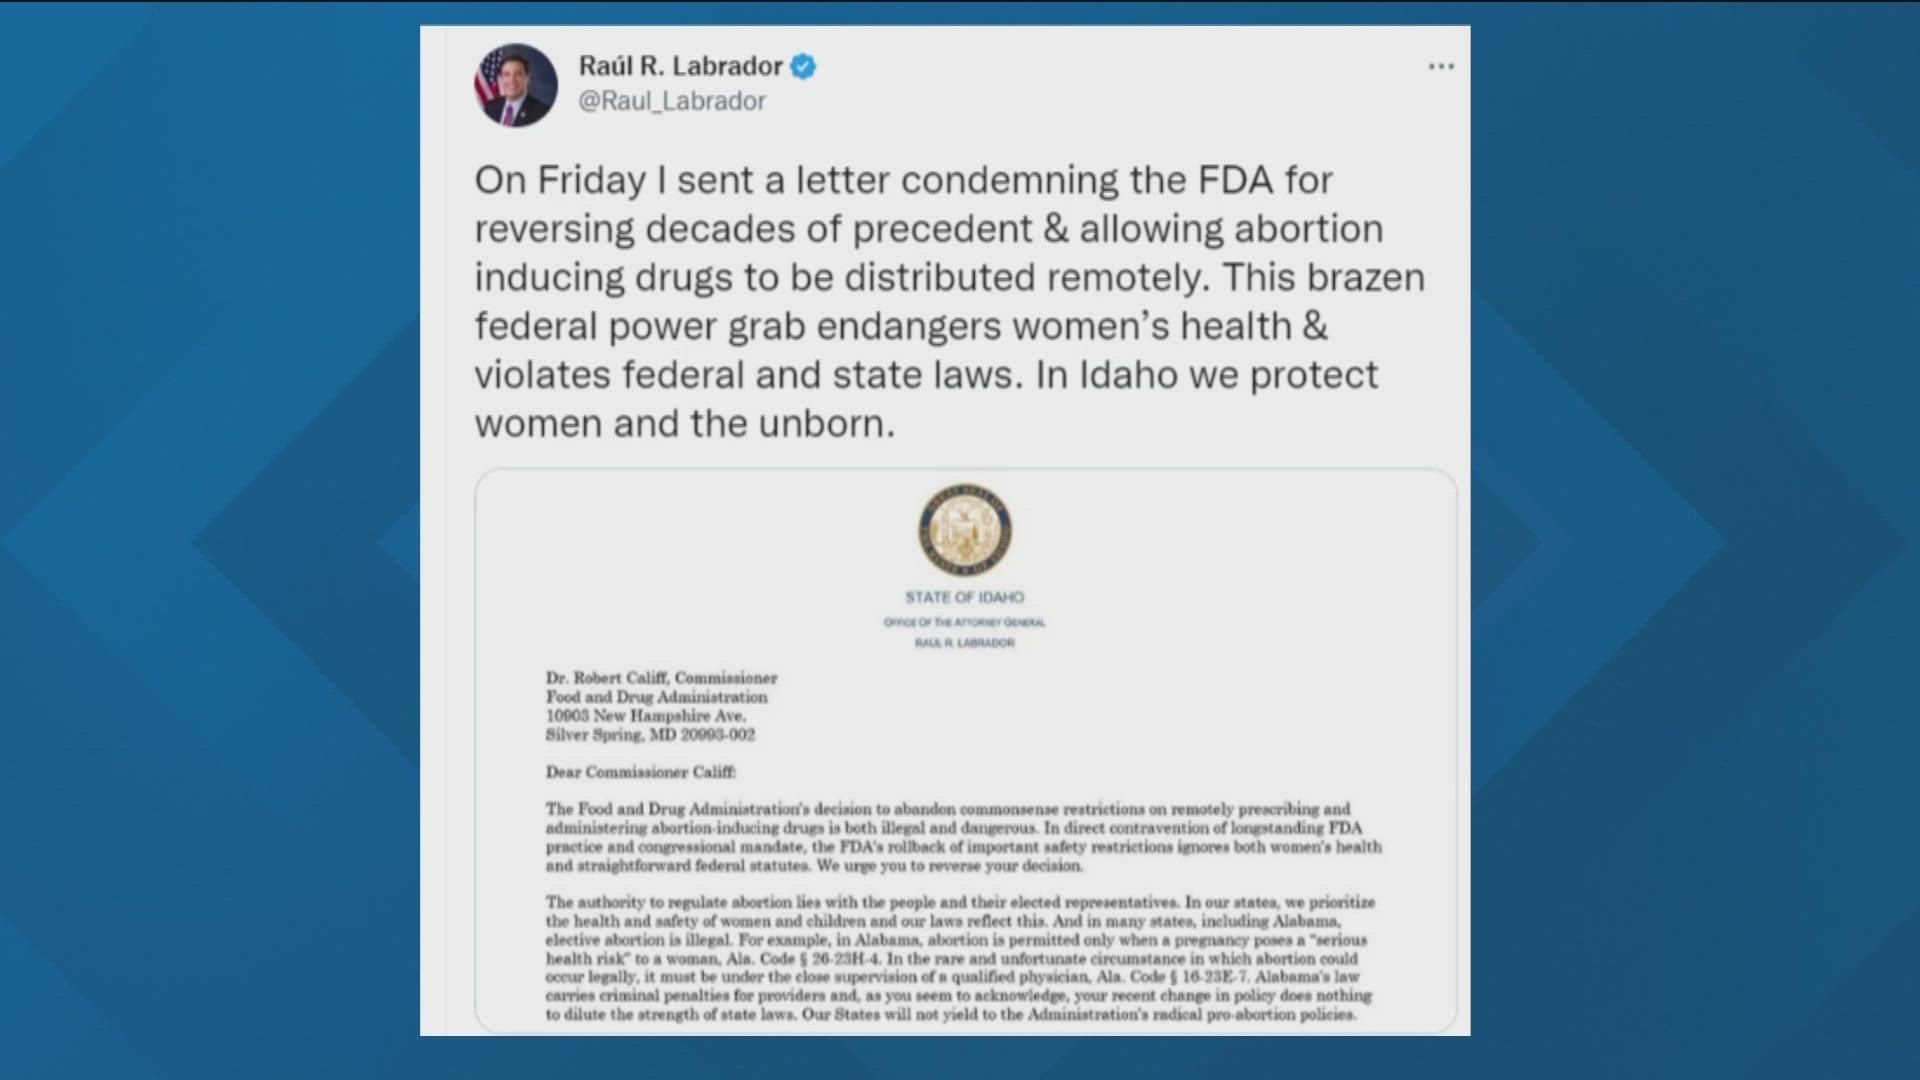 He and 21 other attorneys general are asking for a reversal on the FDA's decision to allow remote prescribing of the medications.